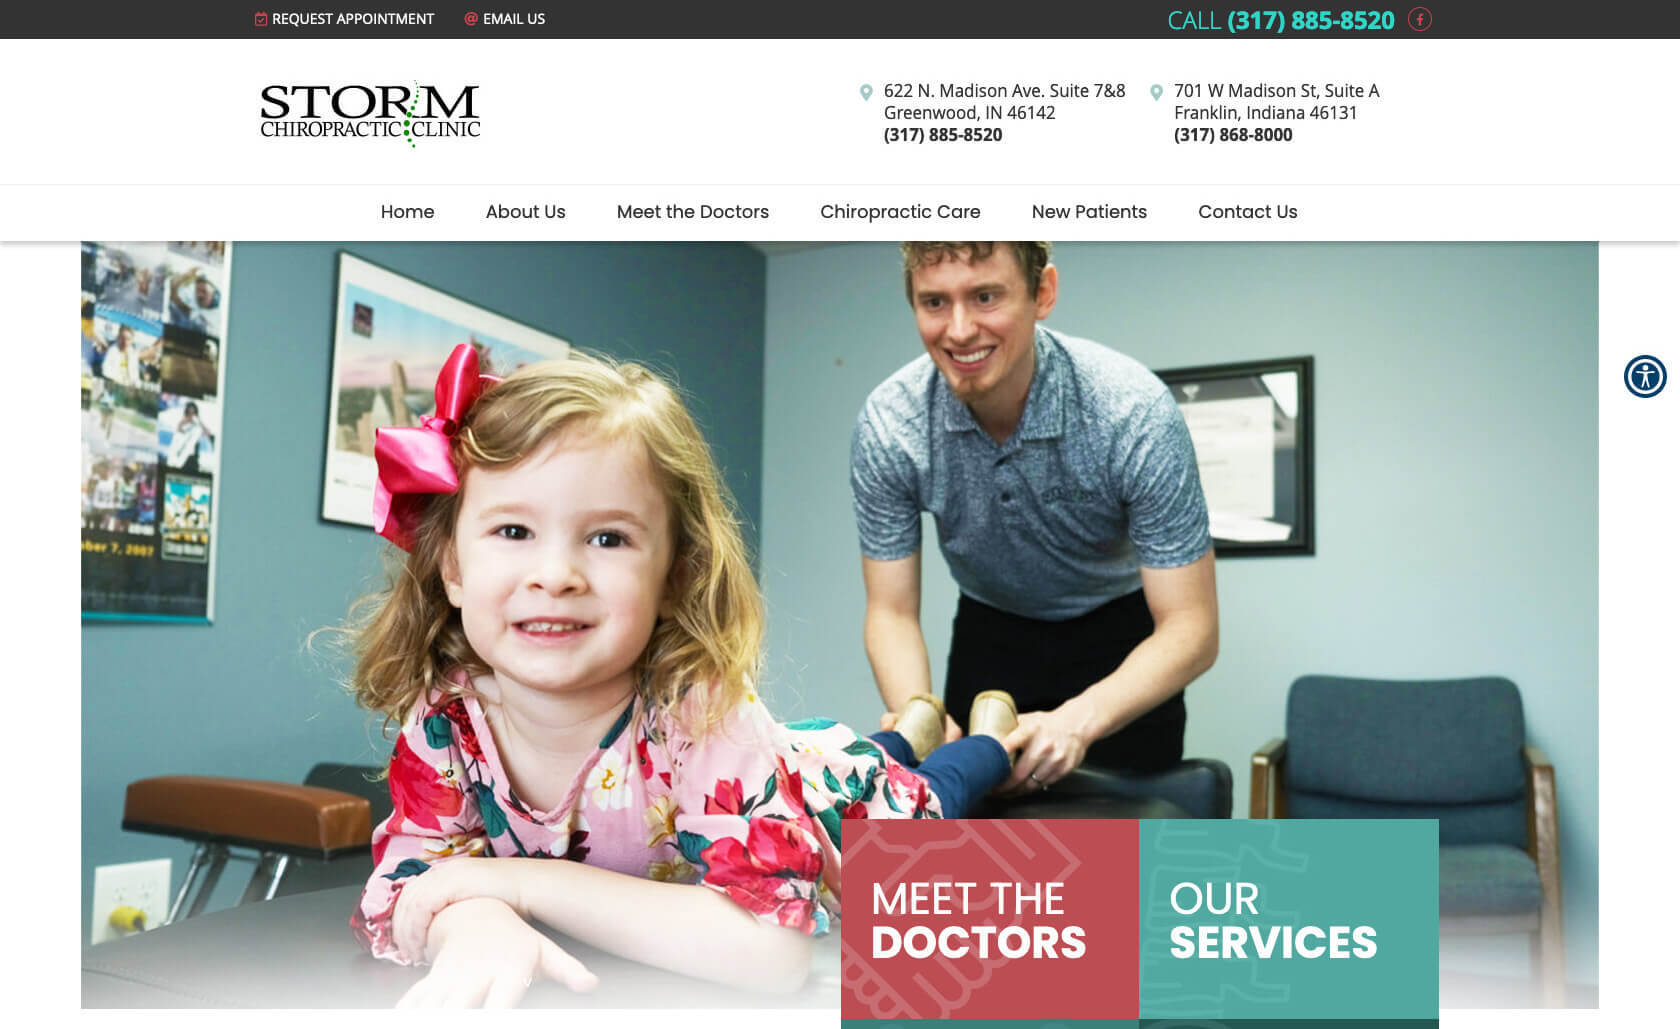 Storm Chiropractic Clinic